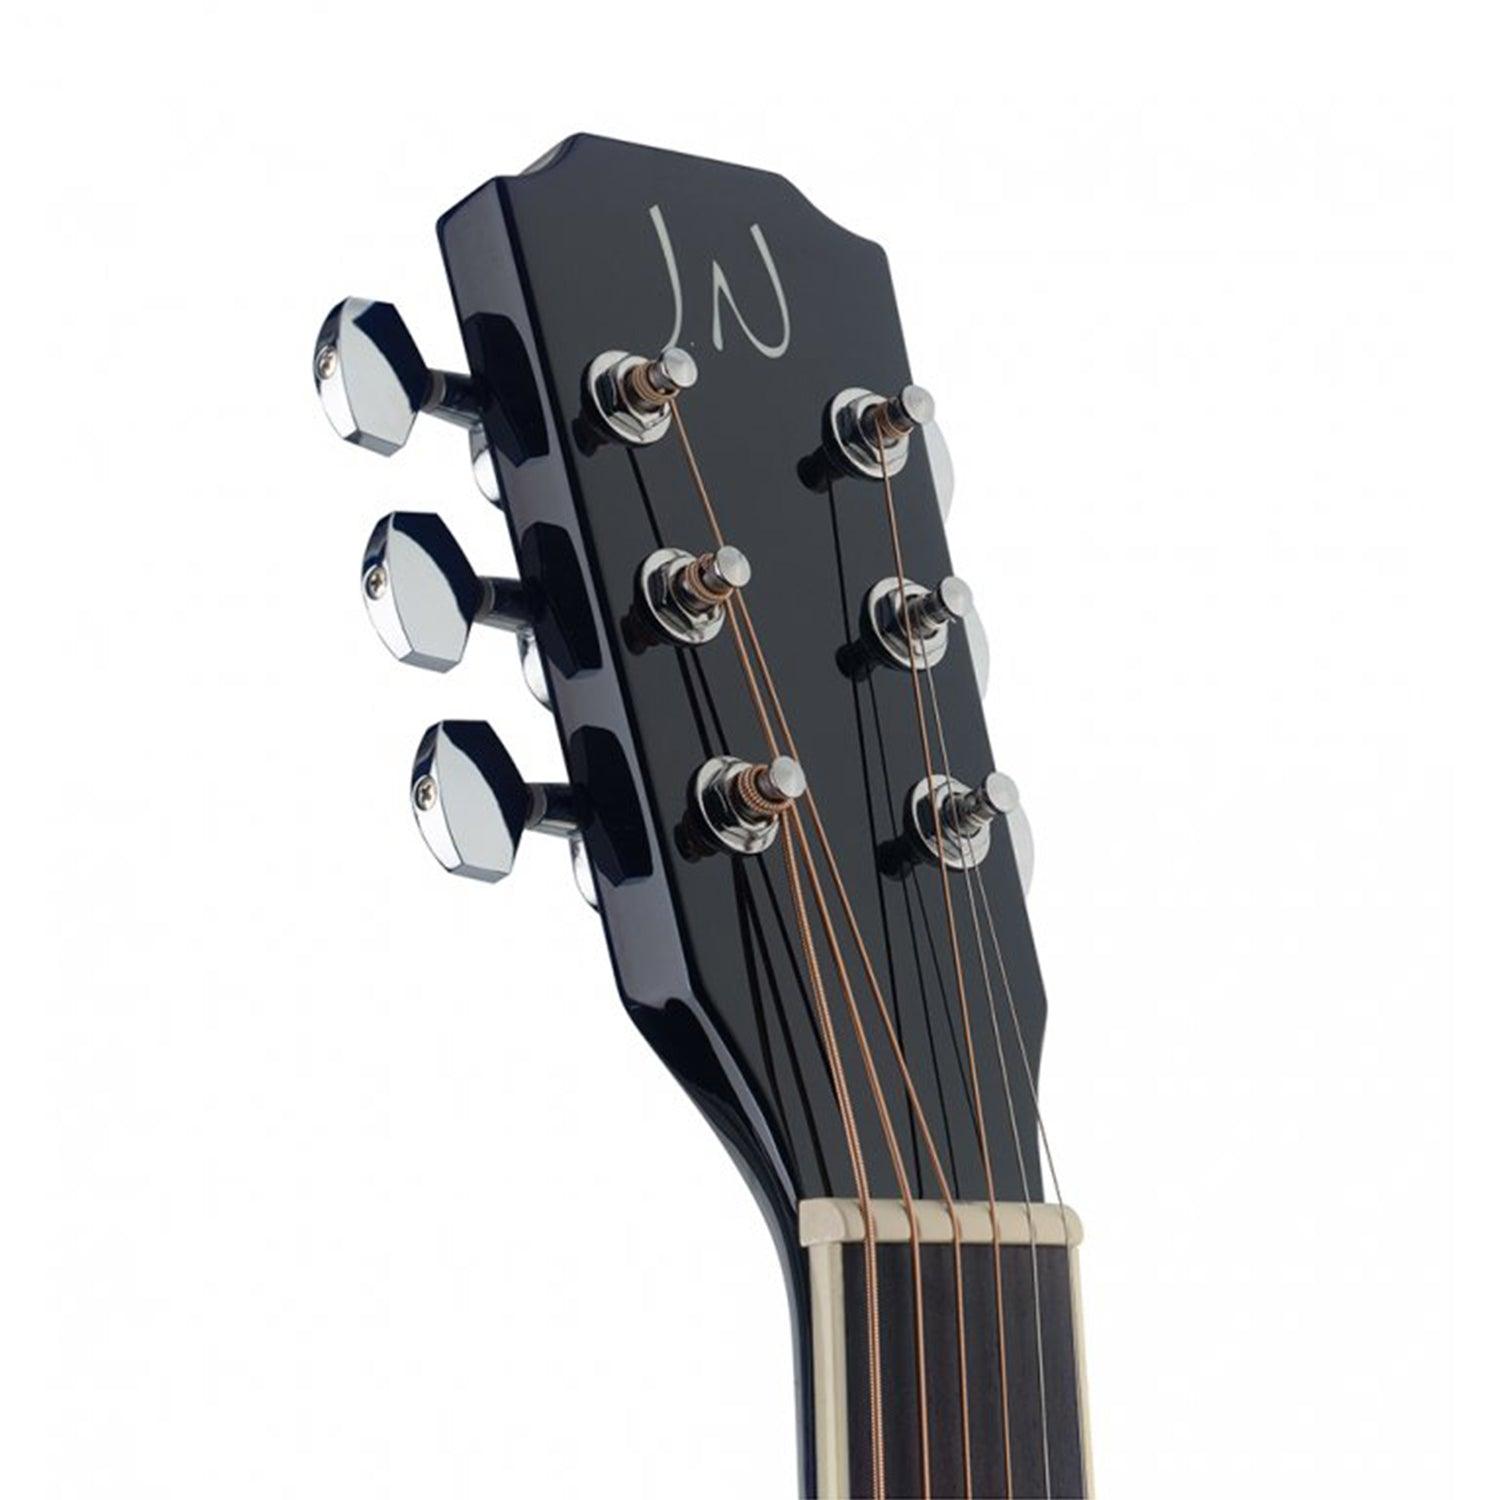 J.N Guitars BES-A BK Black Acoustic Auditorium Guitar with Solid Spruce Top, Bessie series - DY Pro Audio